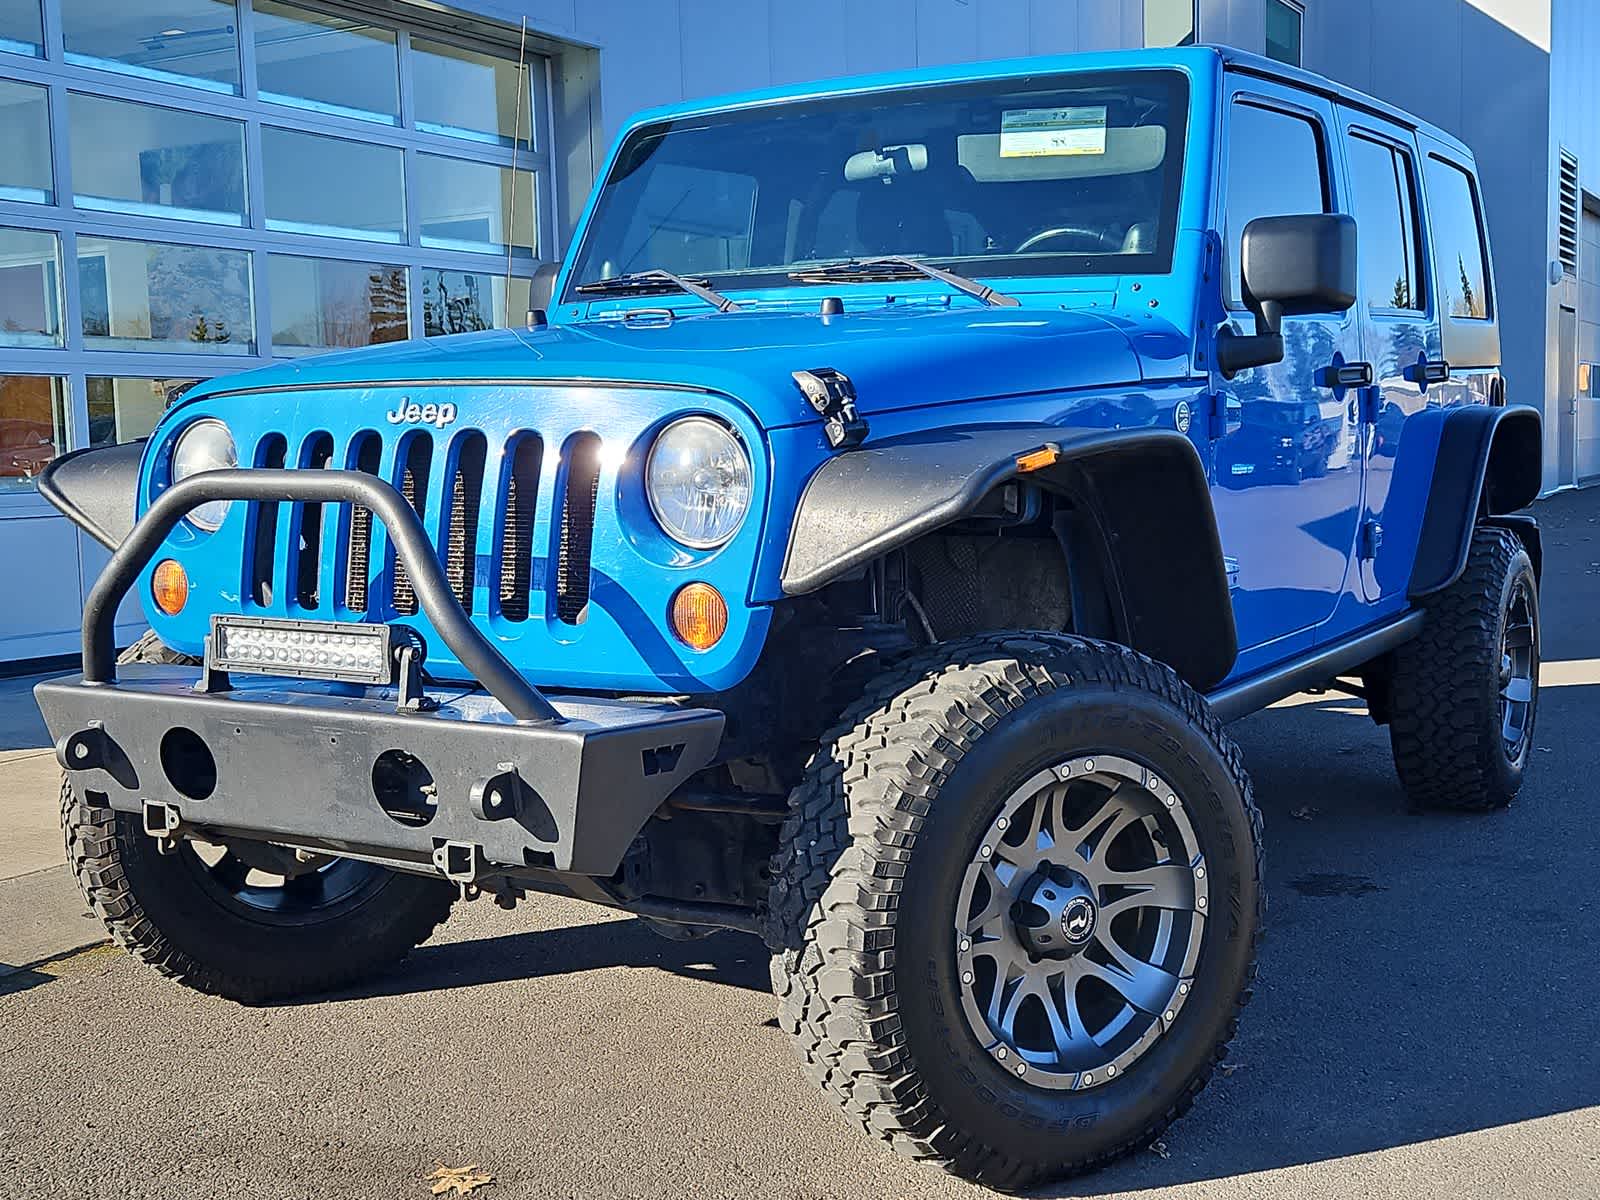 2011 Jeep Wrangler Unlimited Rubicon -
                Eugene, OR